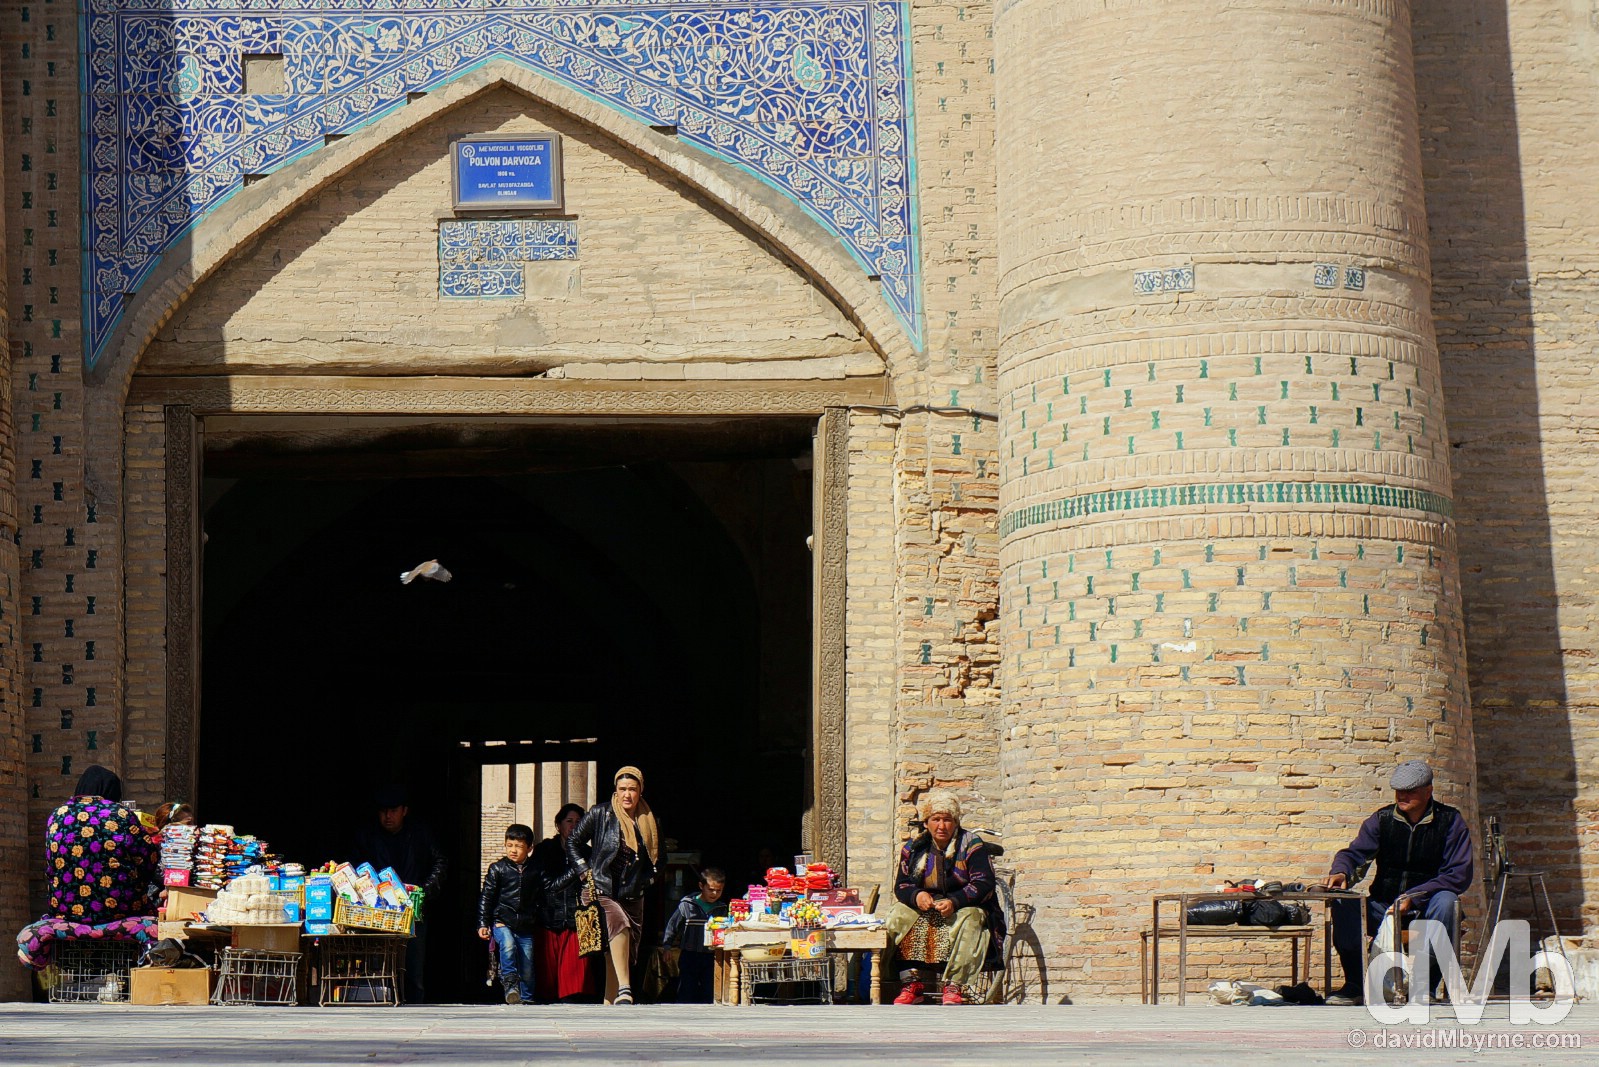 The East Gate, or Polvon Darvoza, of the city walls in Khiva, Uzbekistan. March 14, 2015.